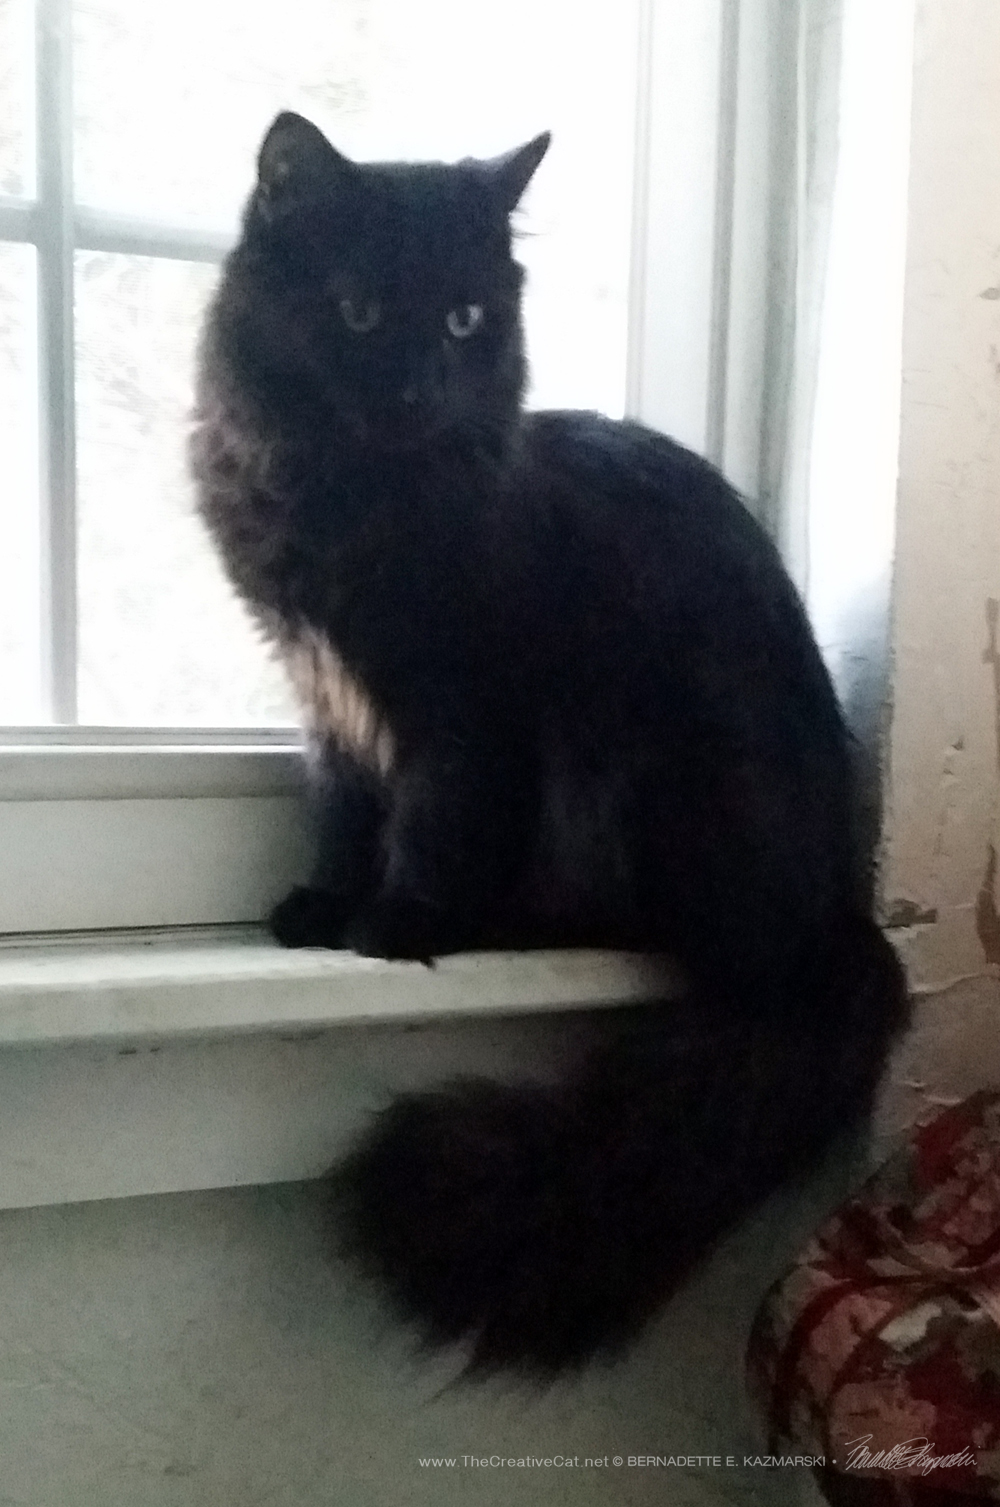 Hamlet on the windowsill shows off his tail.